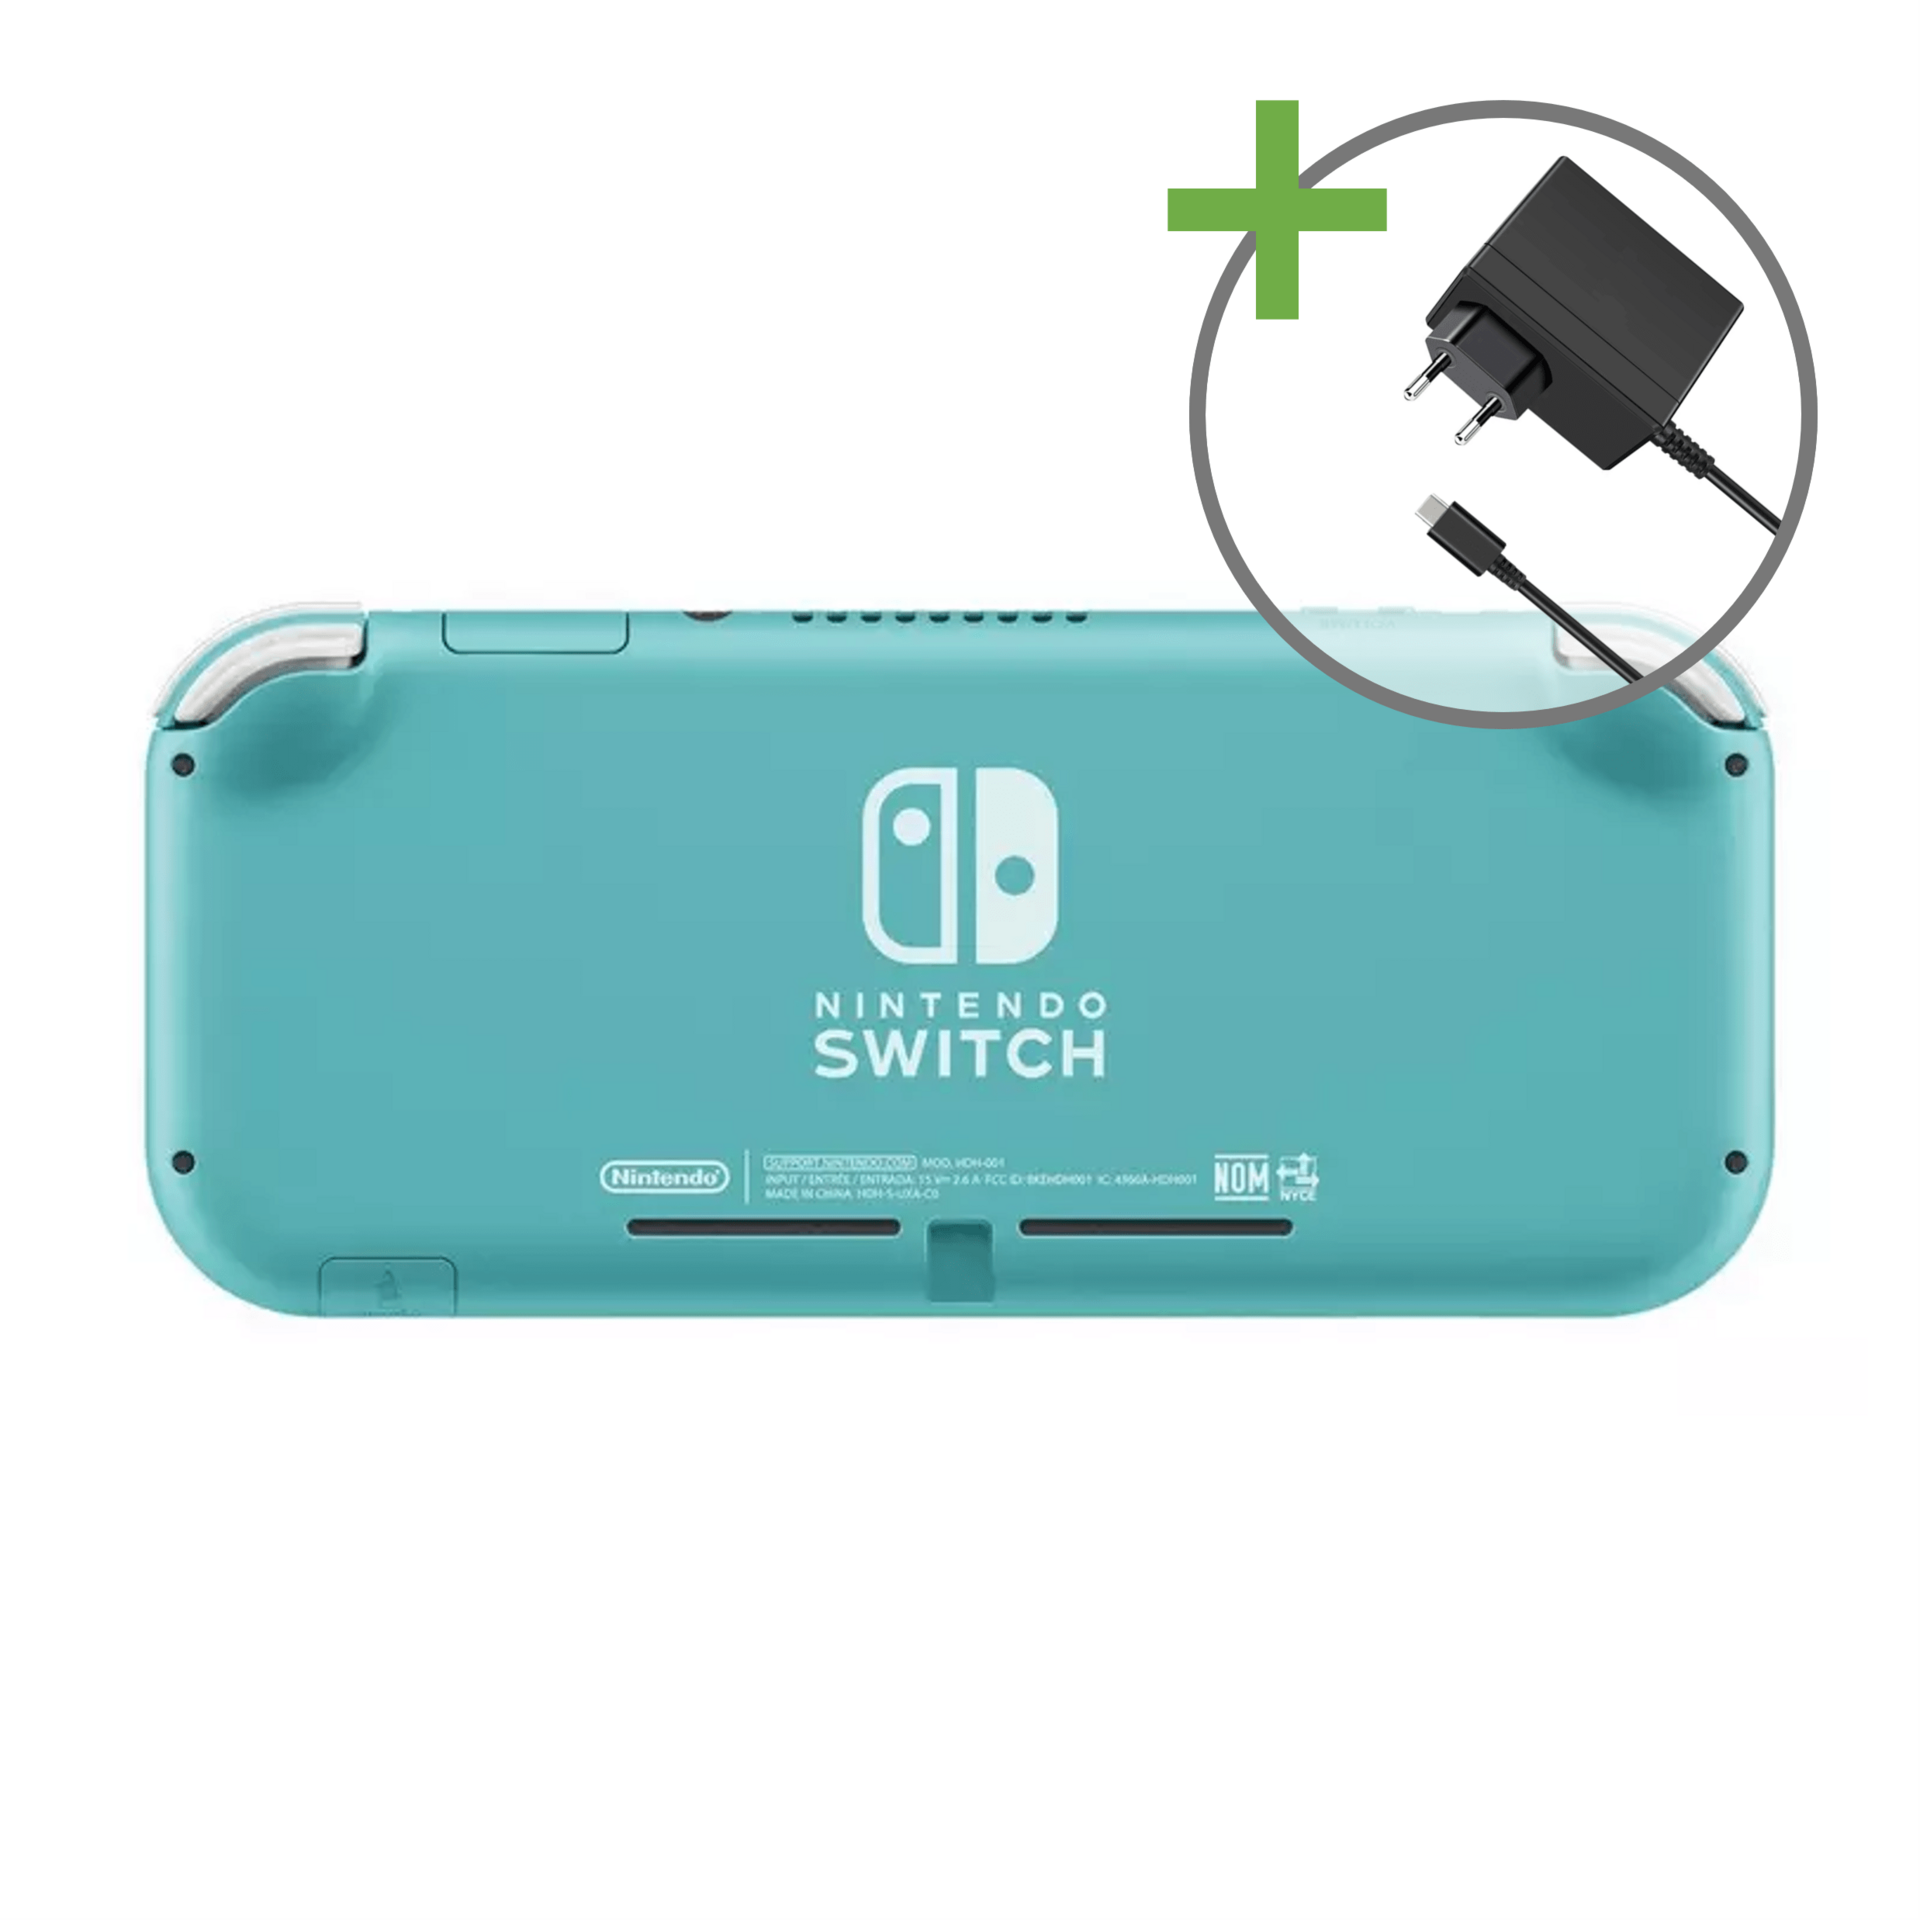 Nintendo Switch Lite Console - Turquoise [Complete] - Nintendo Switch Hardware - 4